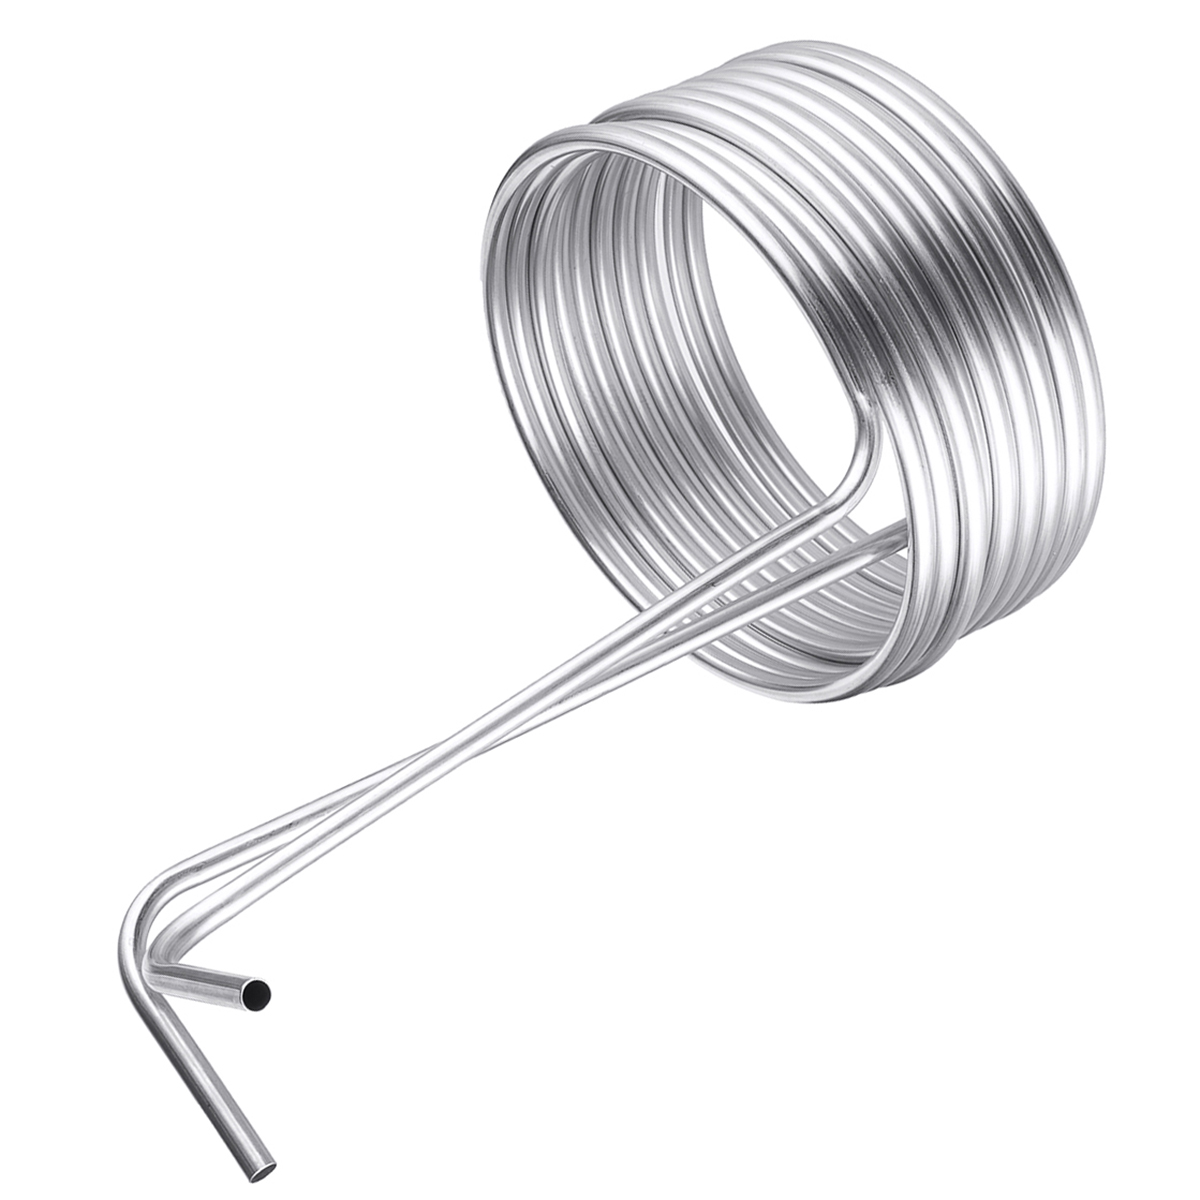 Super-Efficient-Stainless-Steel-Cooling-Coil-Home-Kegerators-Brewing-Wort-Chiller-Pipe-1192962-7